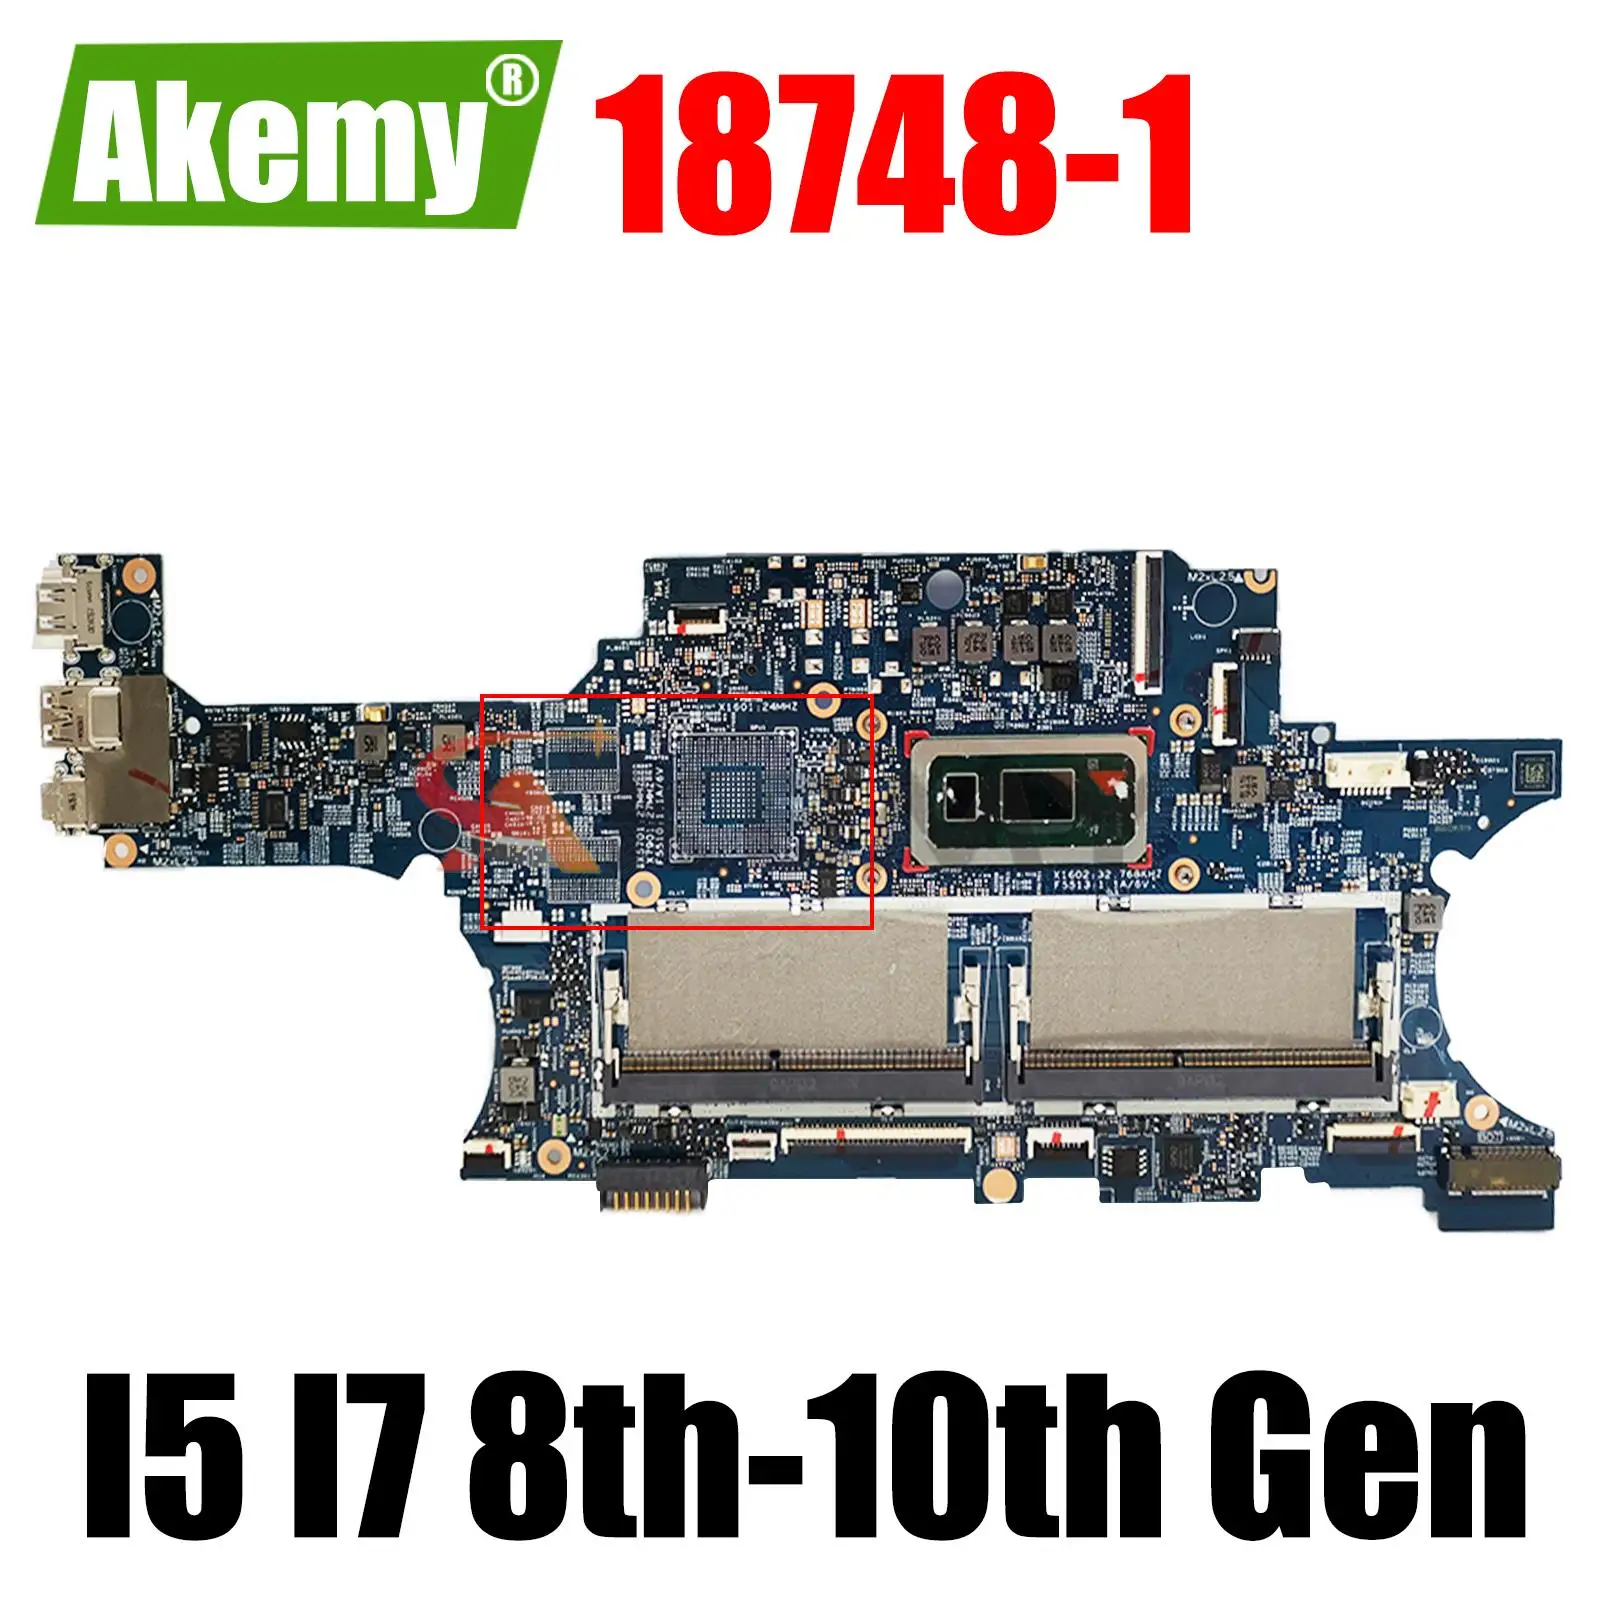 

For HP X360 CONVERT 15-DR Laptop Motherboard Mainboard With I5 I7 8th or 10th Gen CPU 18748-1 Motherboard